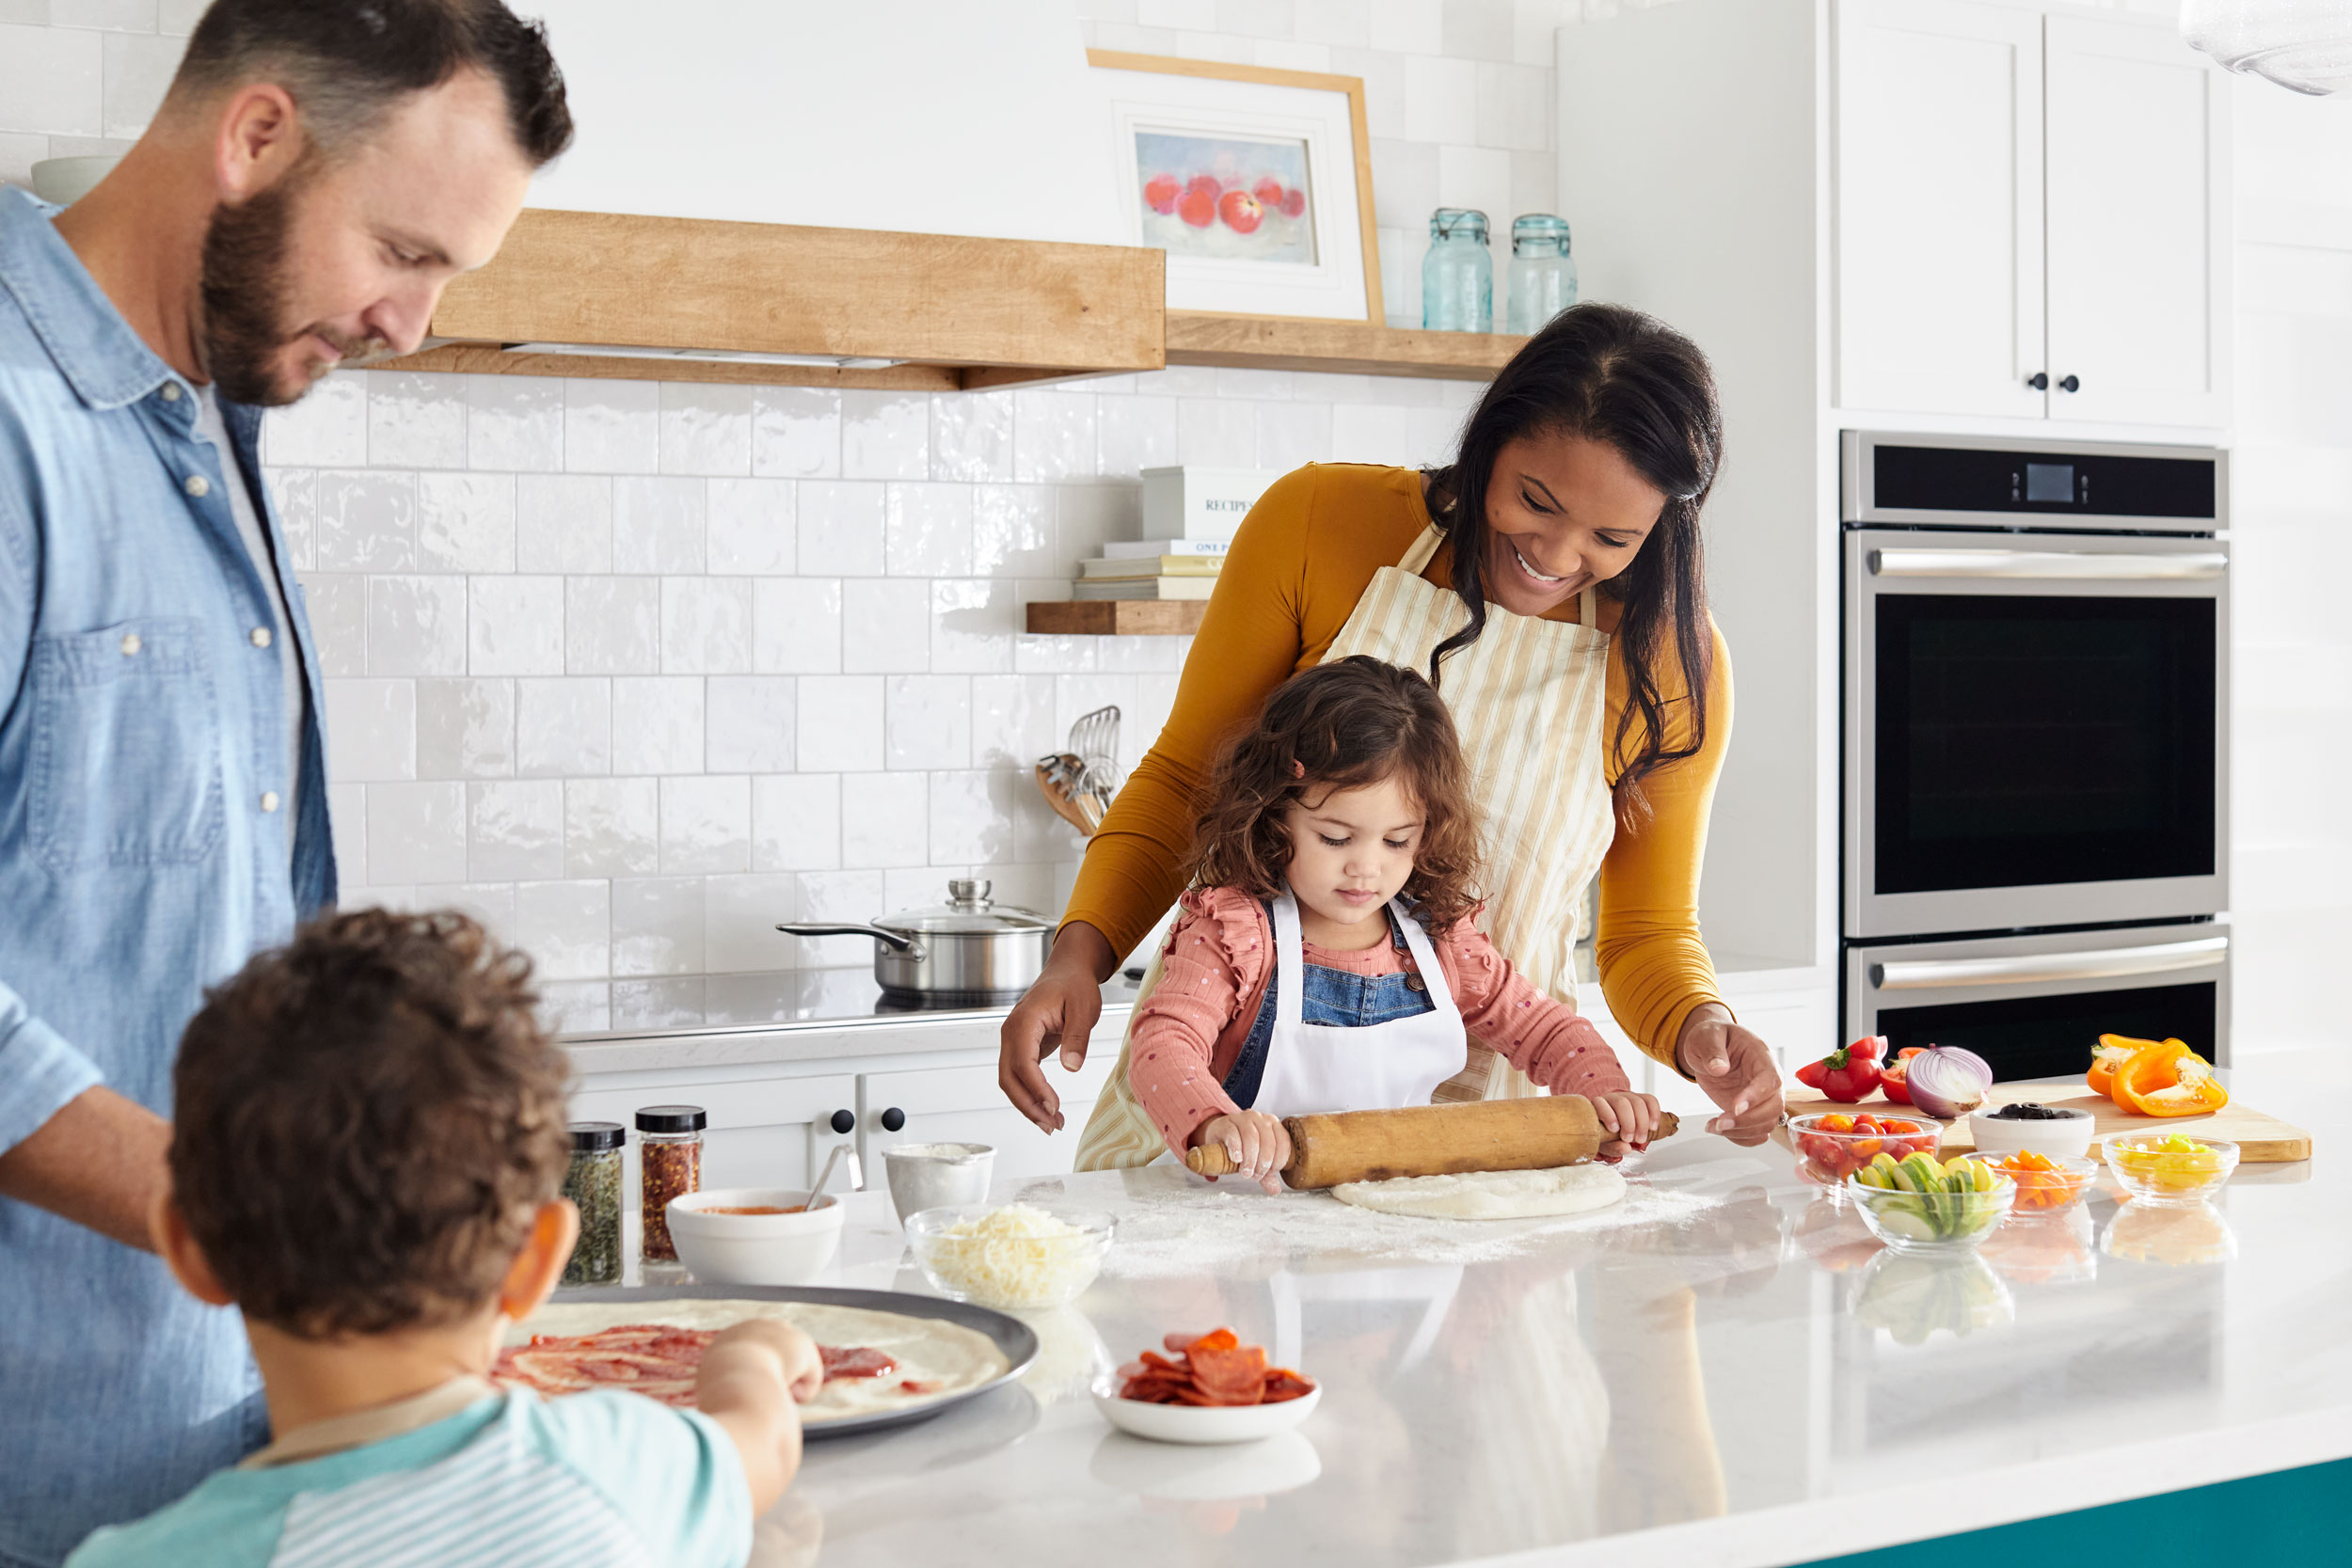 famly-making-pizza-in-kitchen-dc-commercial-photography-eli-meir-kaplan